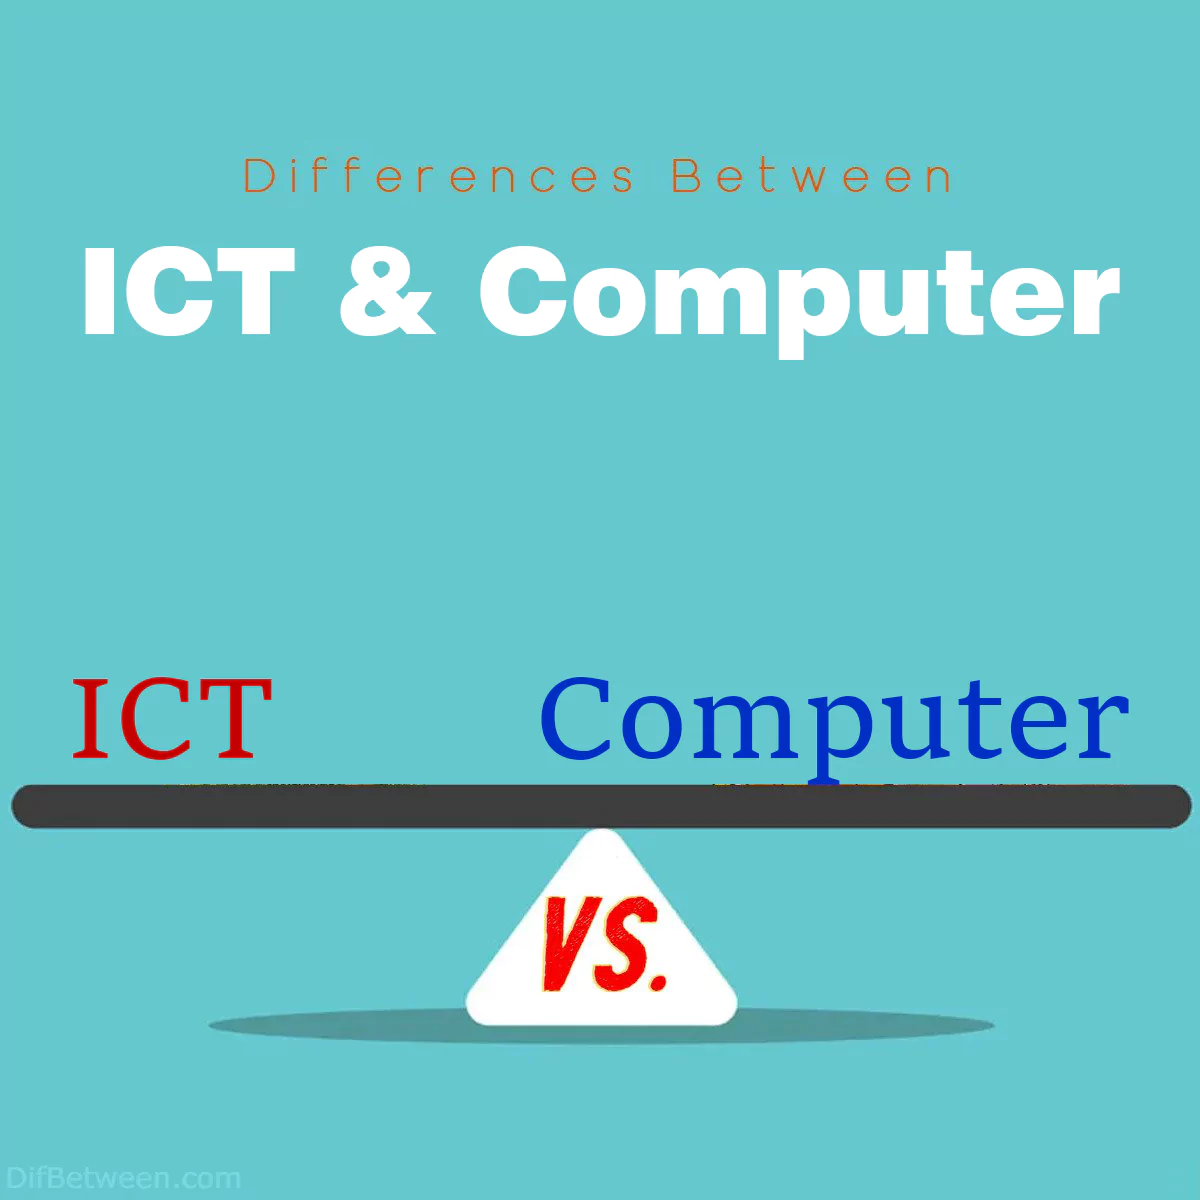 Differences Between ICT and Computer